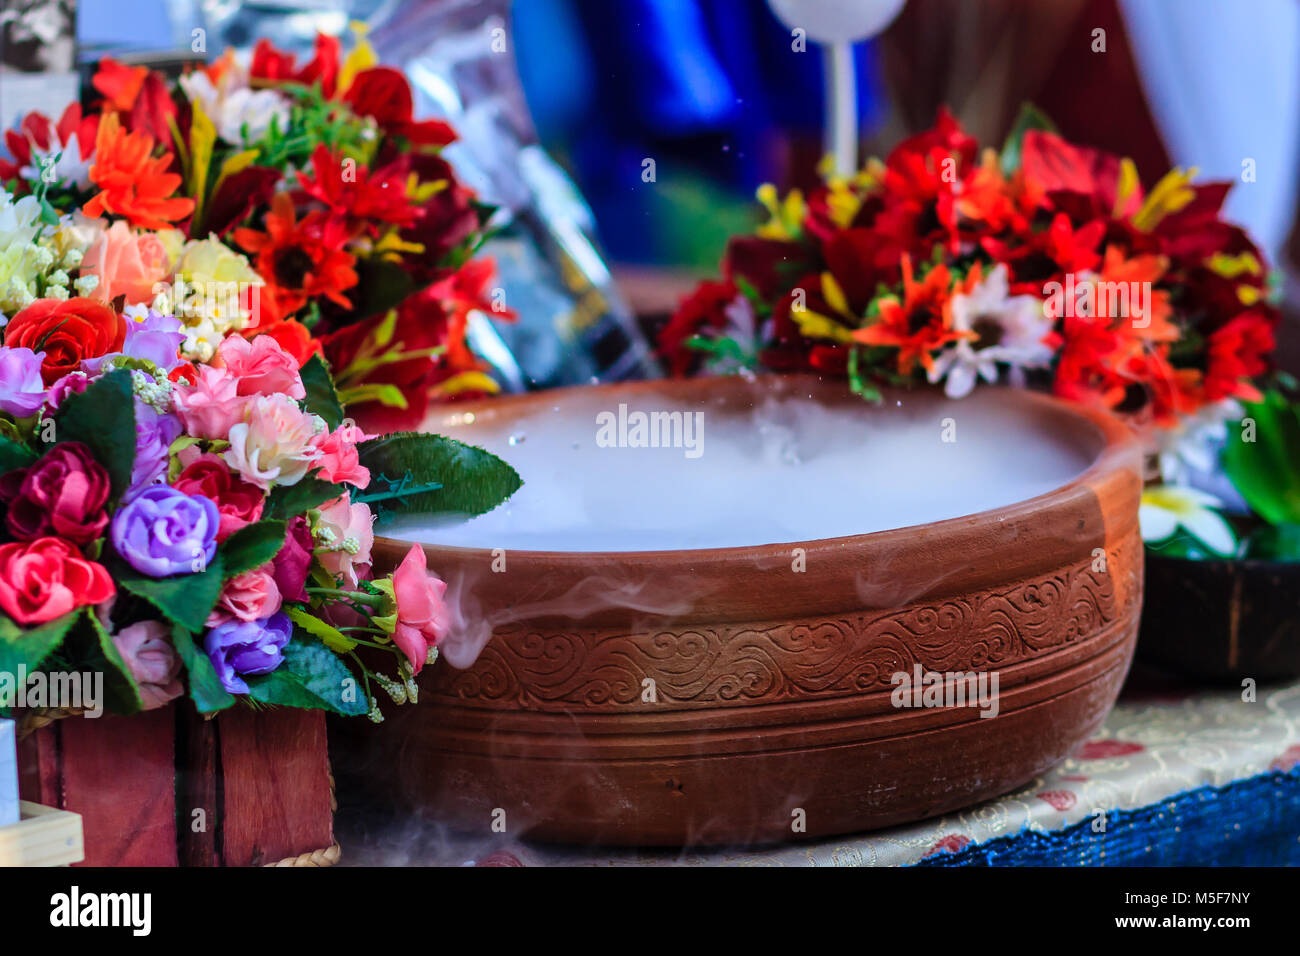 Beautiful decoration in spa shop with artificial flowers and dry ice smoke in the ceramic bowl. Stock Photo